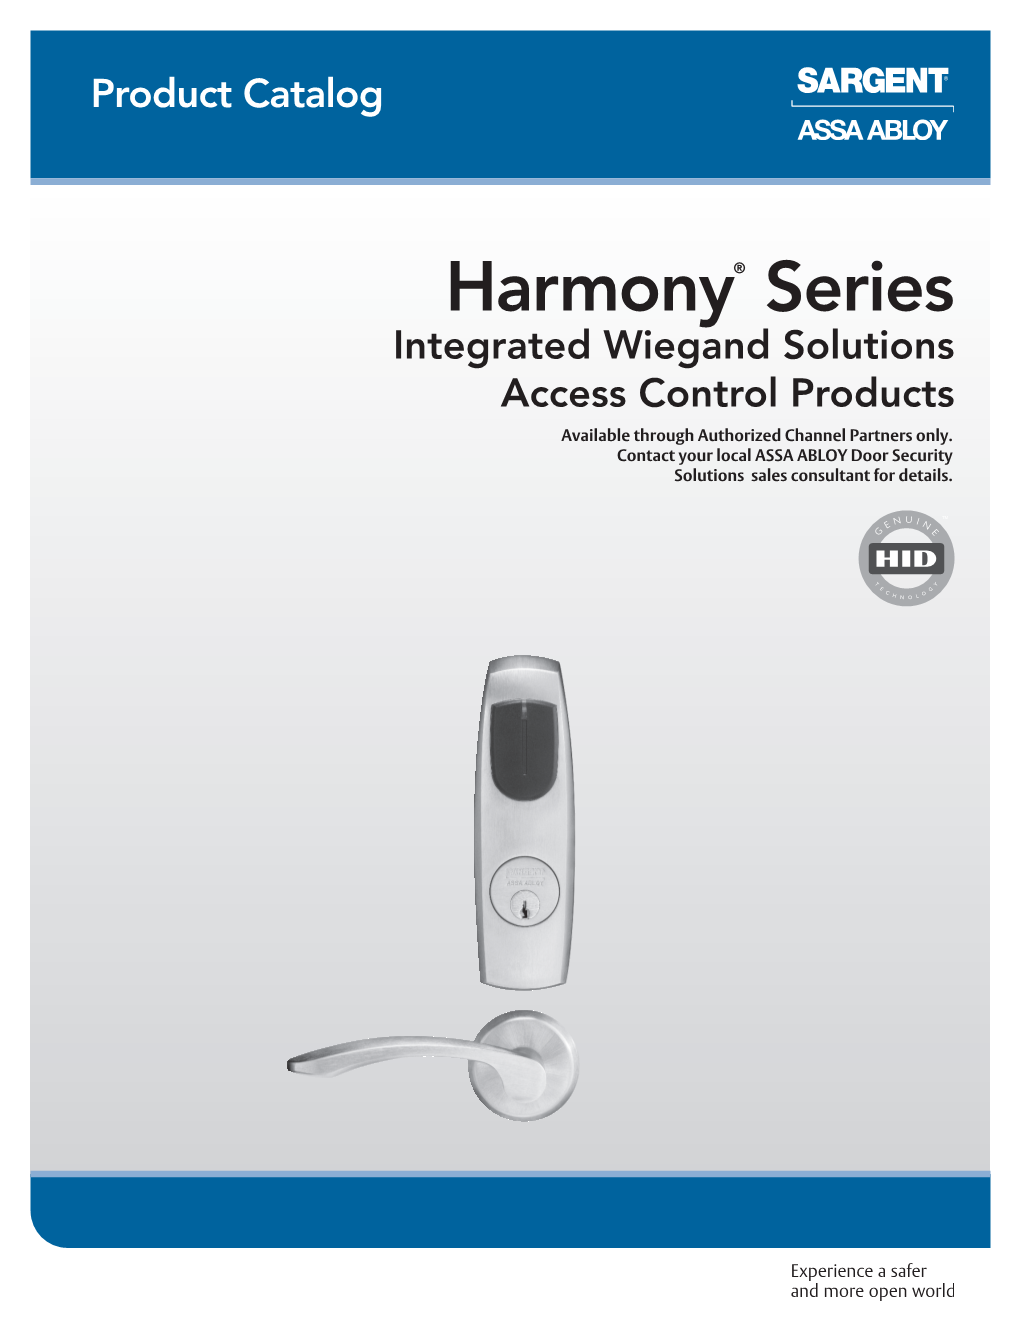 Harmony® Series Integrated Wiegand Solutions Access Control Products Available Through Authorized Channel Partners Only